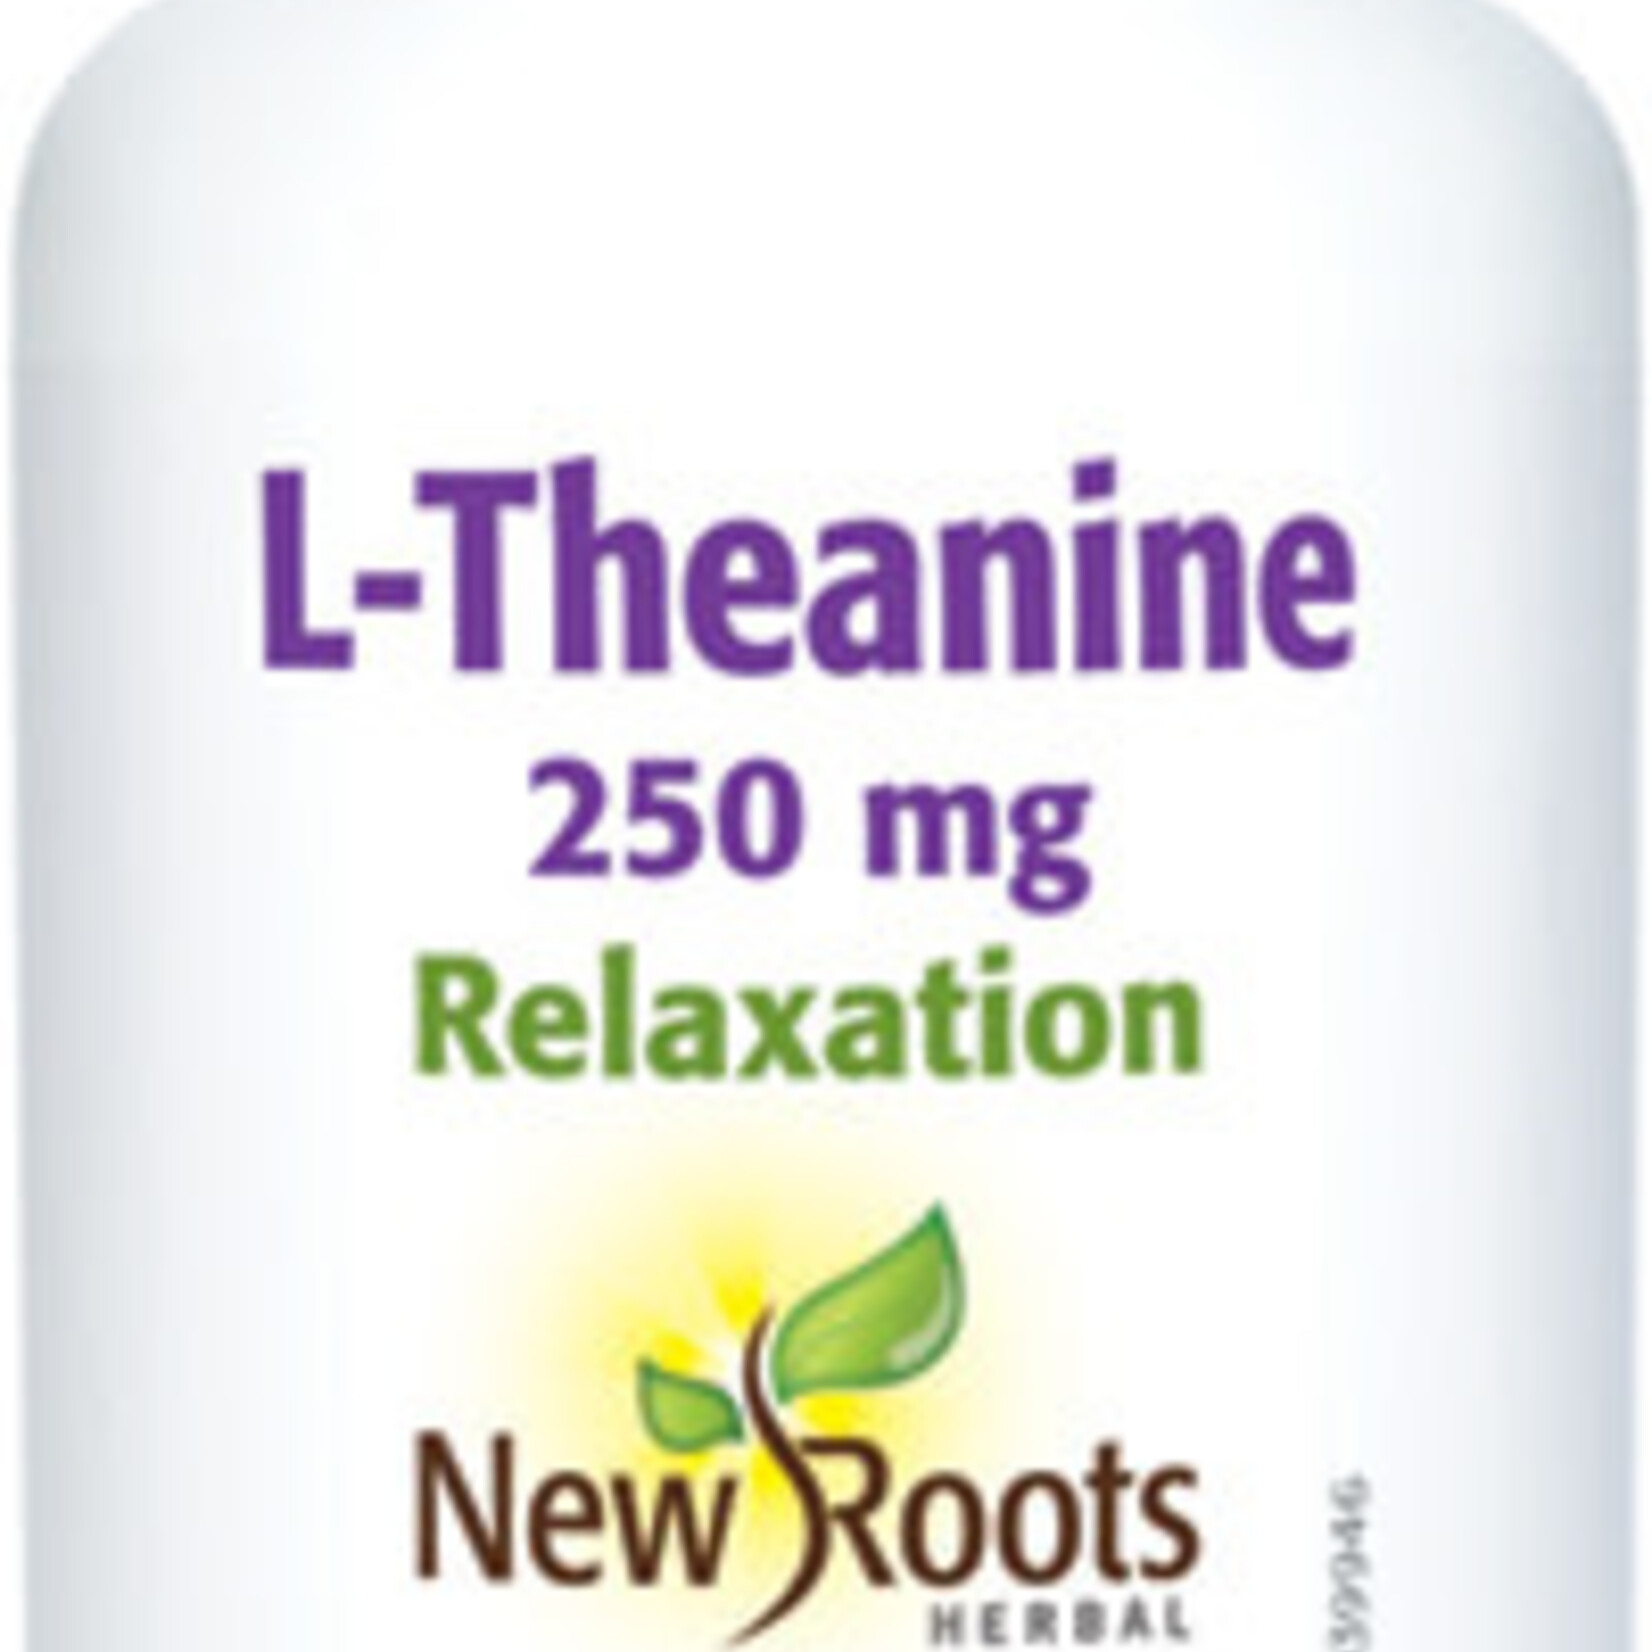 New Roots New Roots L-Theanine 250mg 60 caps